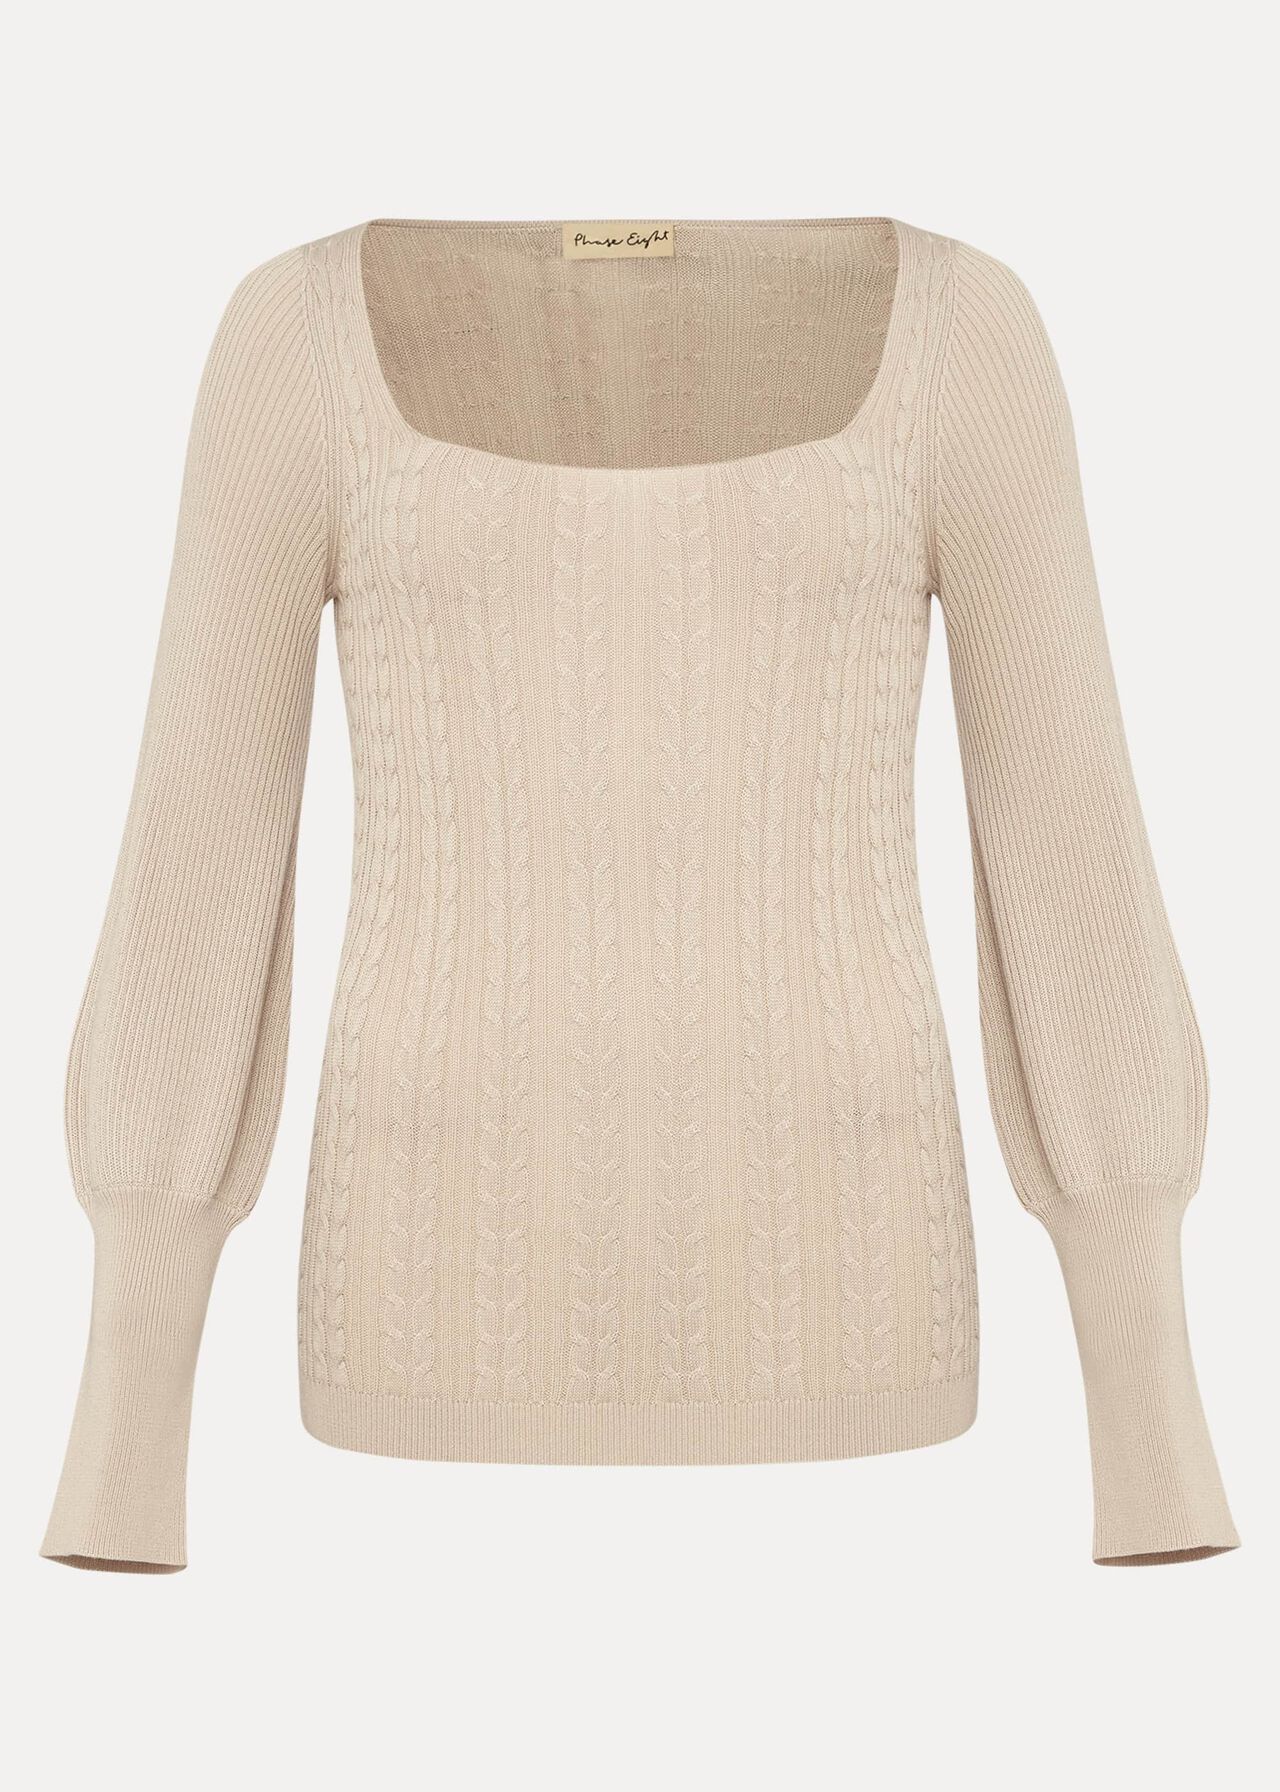 Lucca Square Neck Cable Knit Jumper